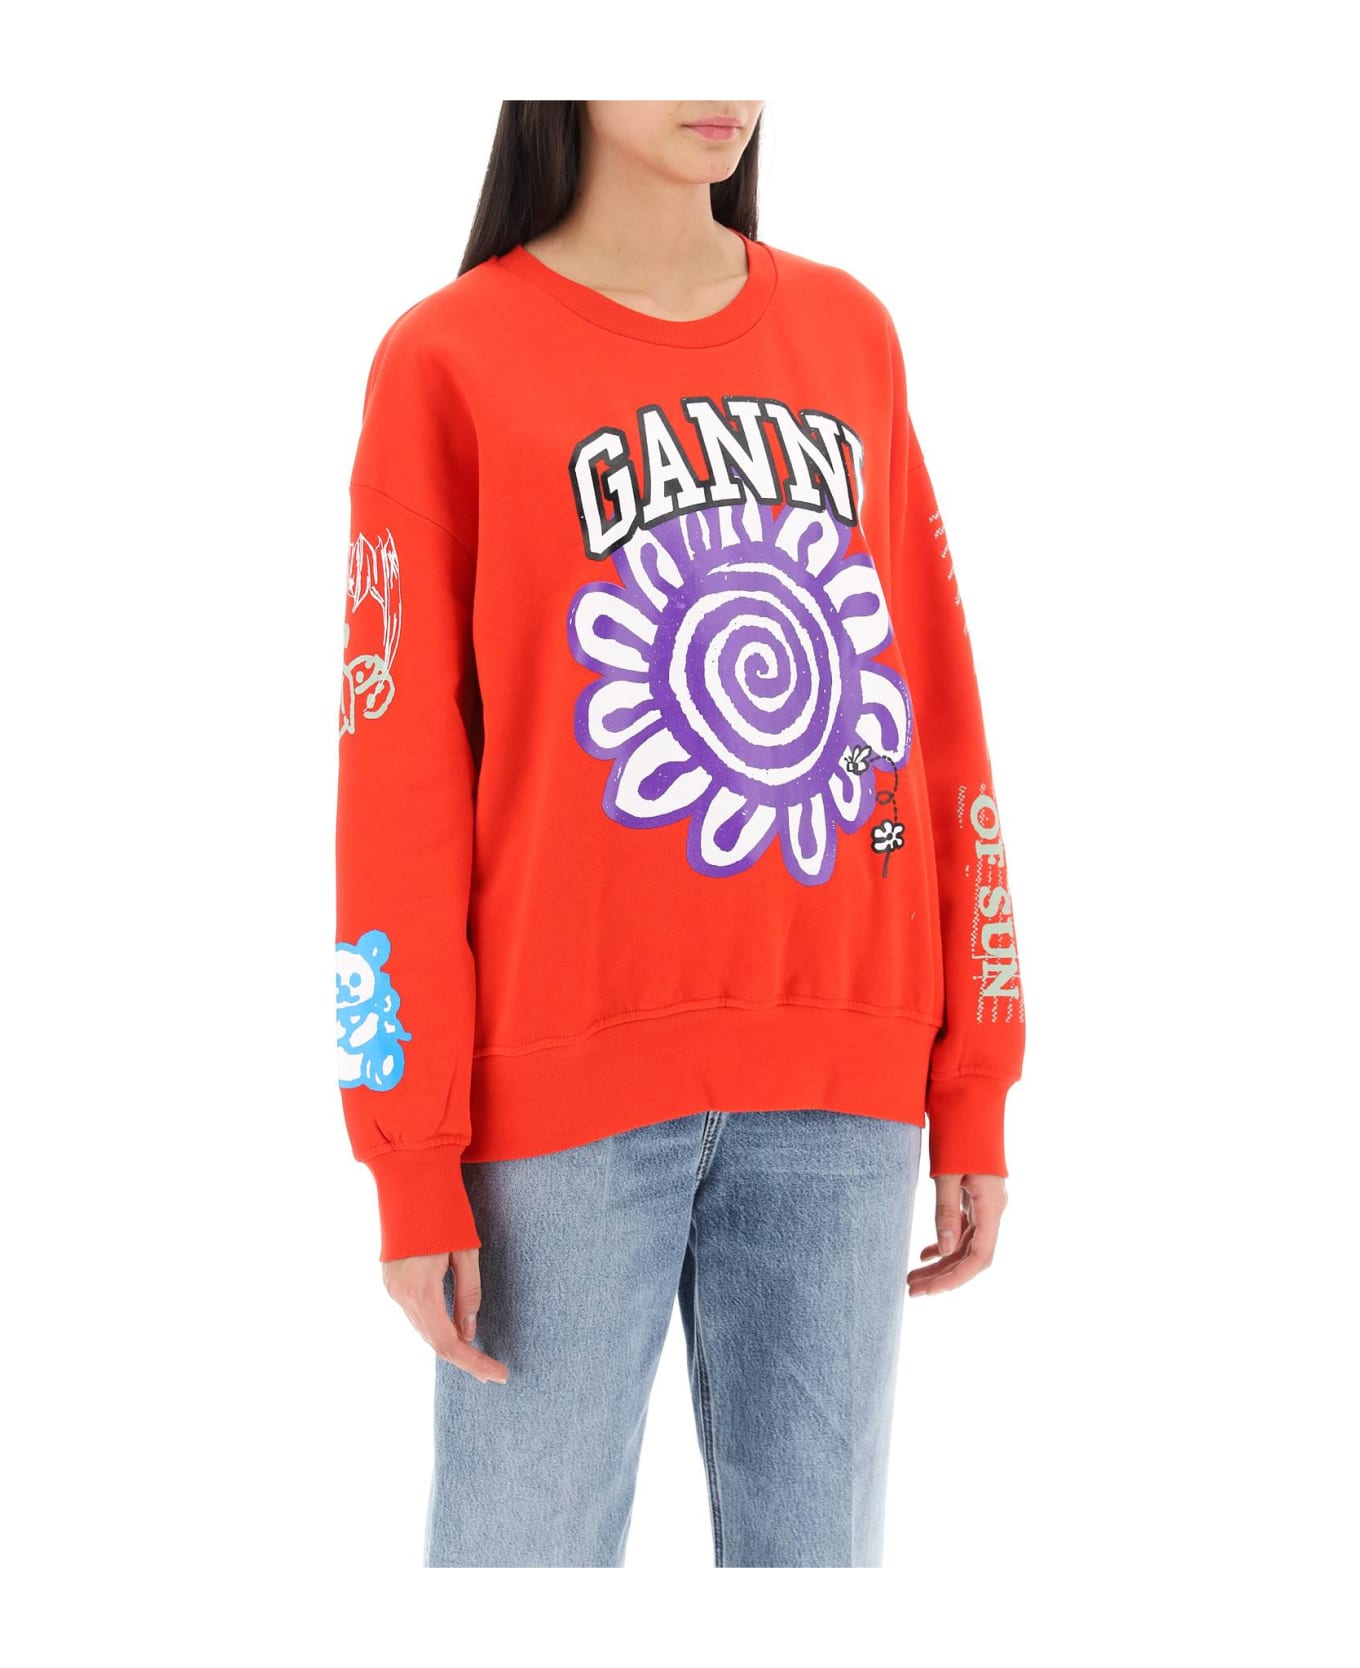 Ganni Sweatshirt With Graphic Prints - HIGH RISK RED (Red) フリース